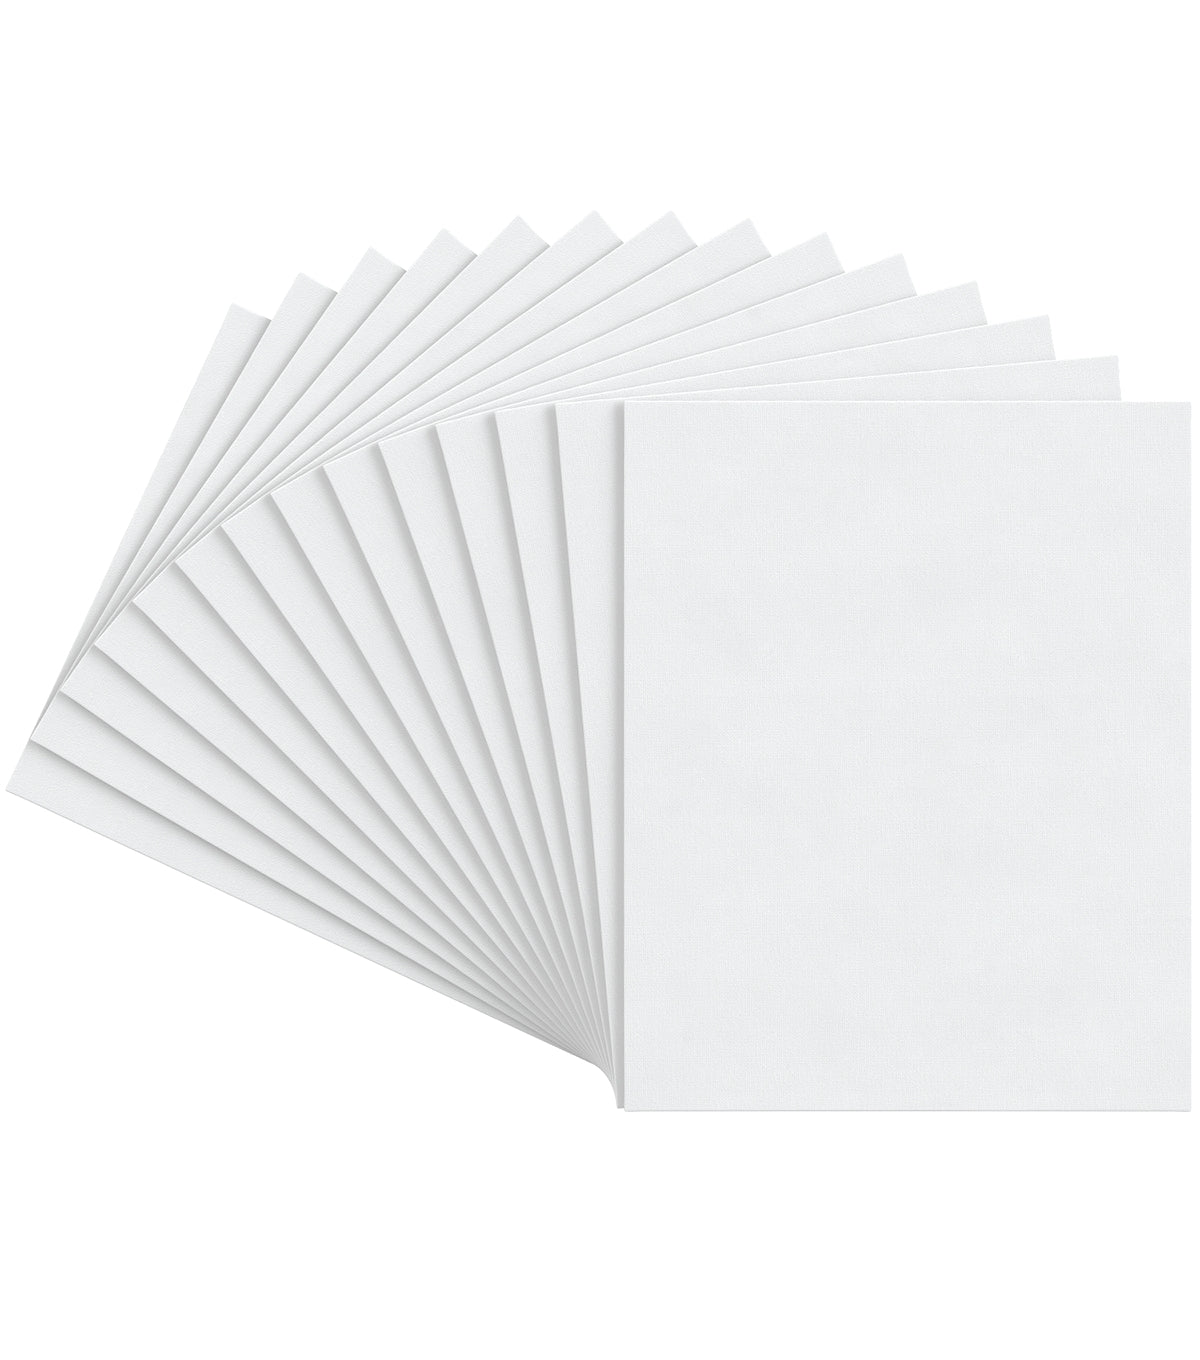 Arteza Paint Canvases for Painting, Pack of 14, 16 x 20 Inches, Blank White  Art Canvas Boards, 100% Cotton, 8 oz Gesso-Primed, Art Supplies for Adults